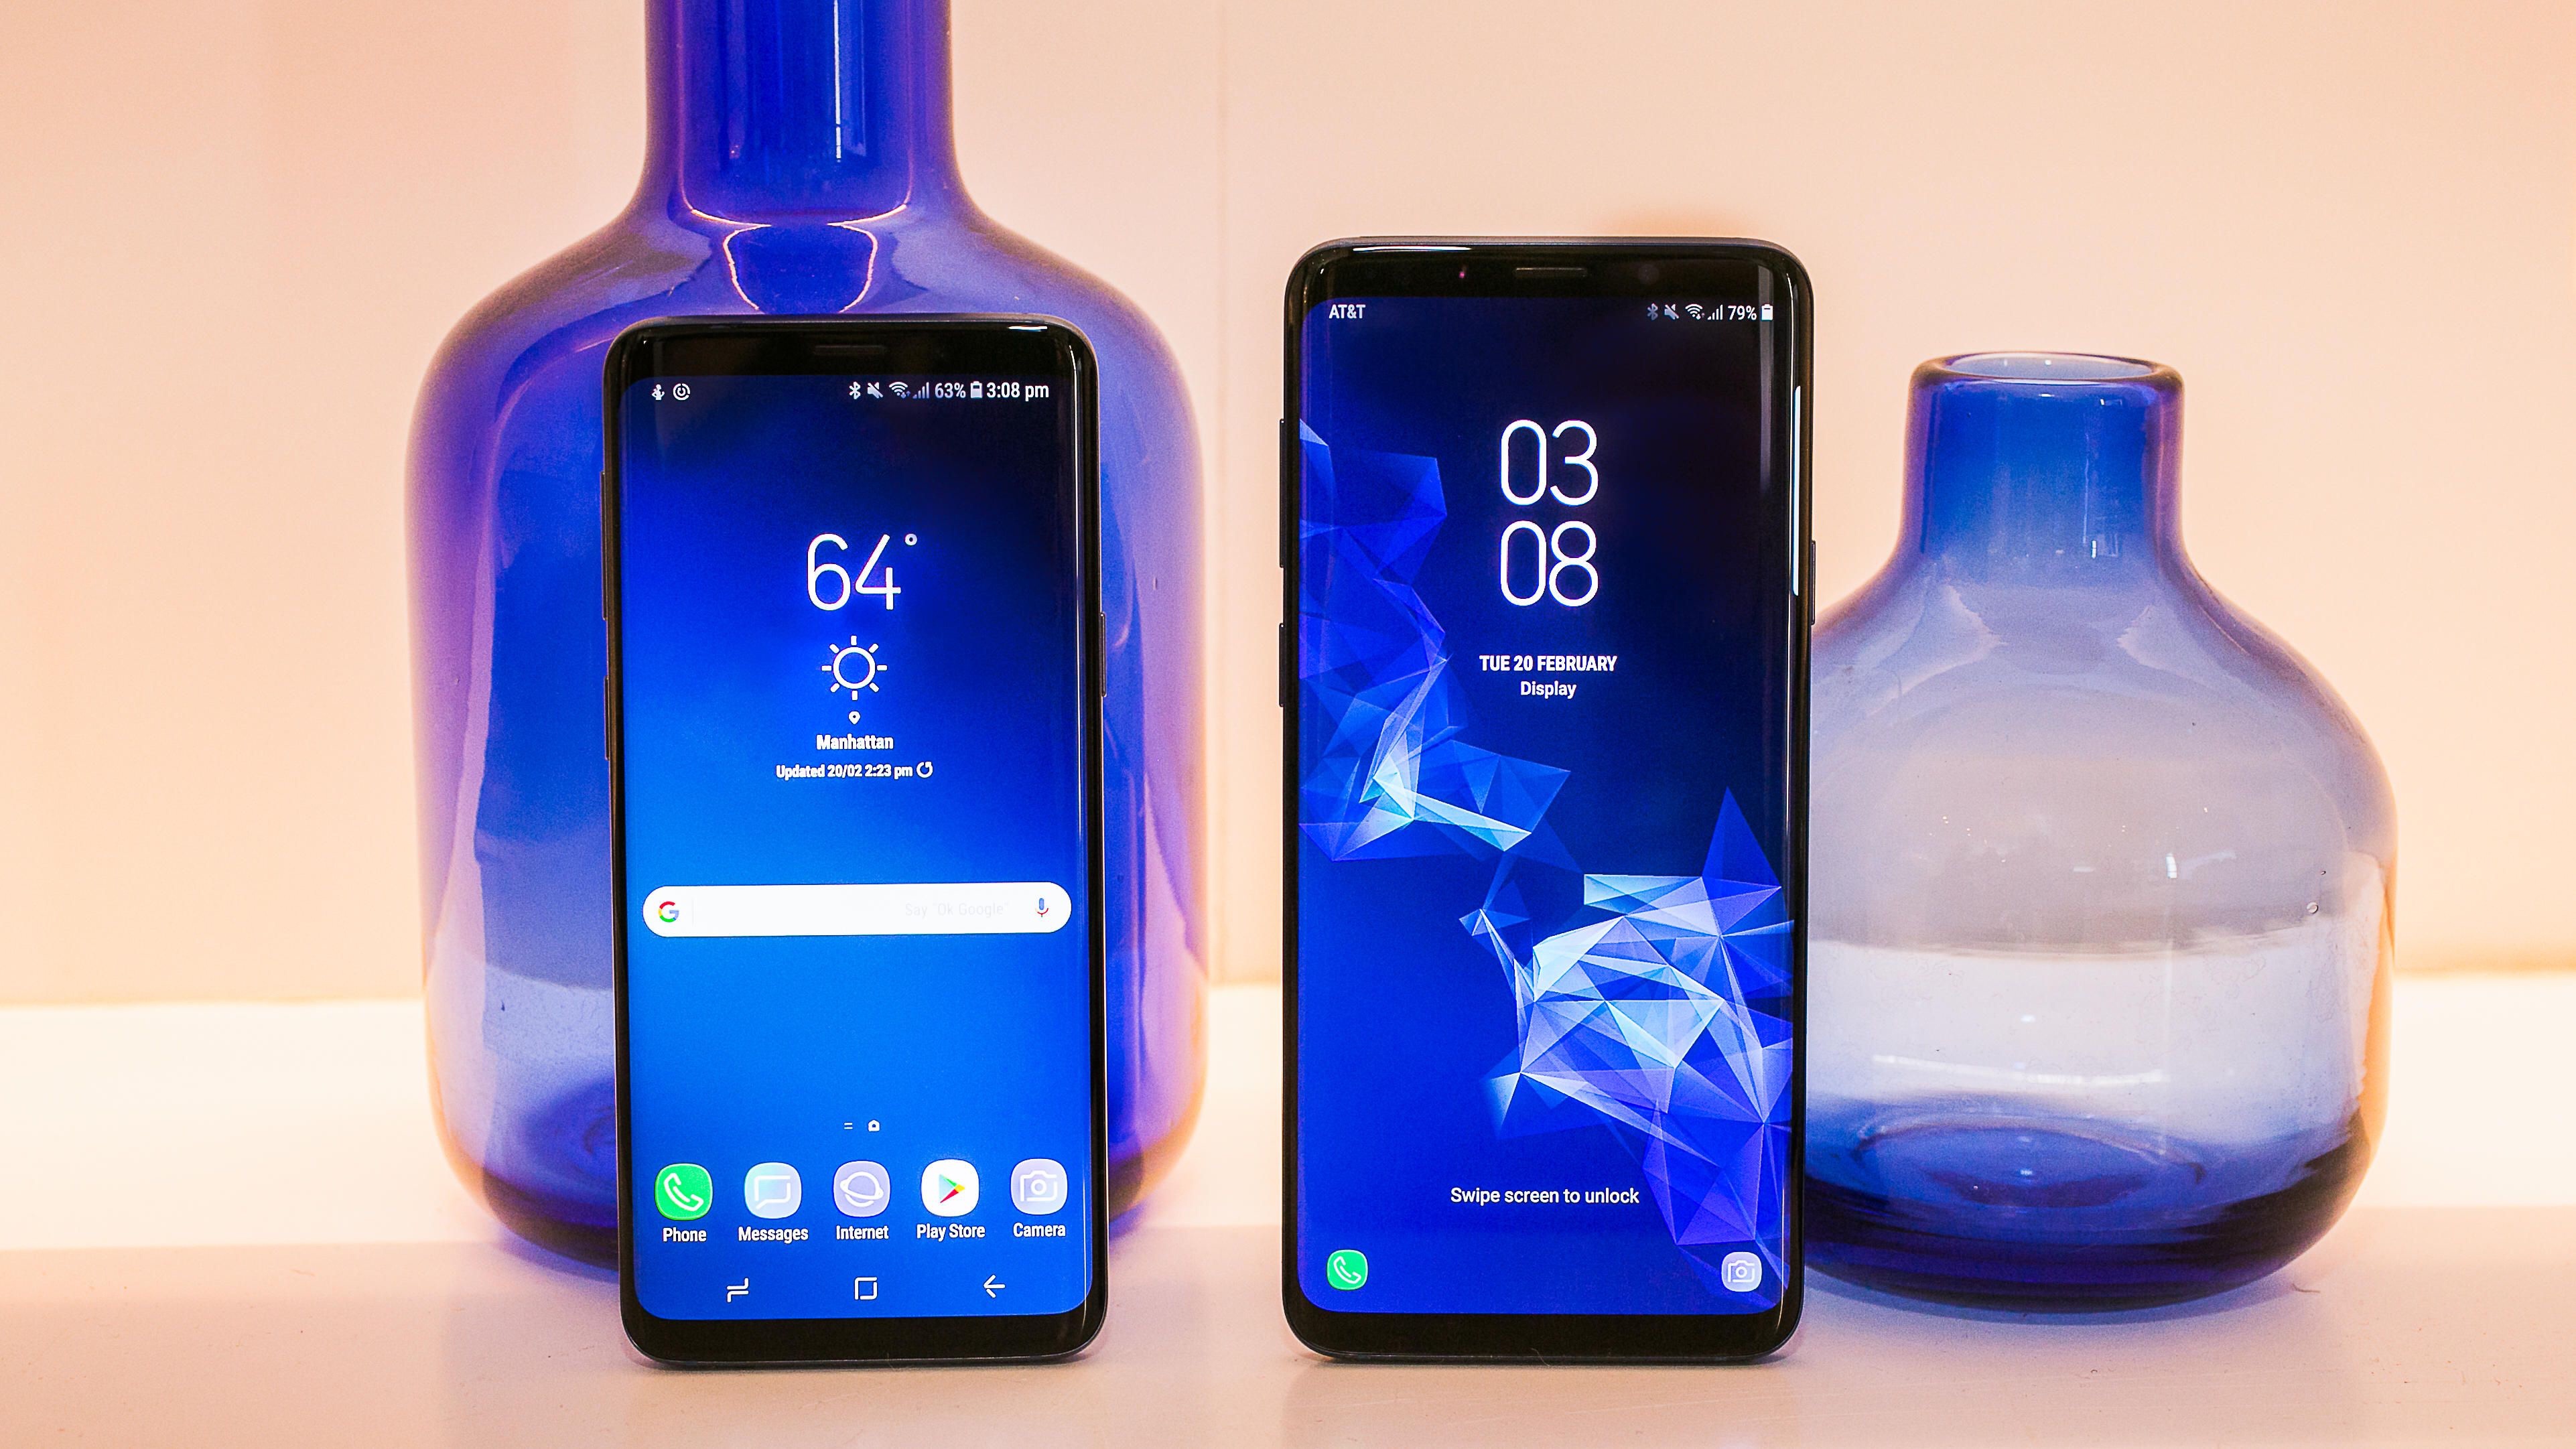 How to turn off Bixby on Samsung Galaxy S9, S8, and Note 8